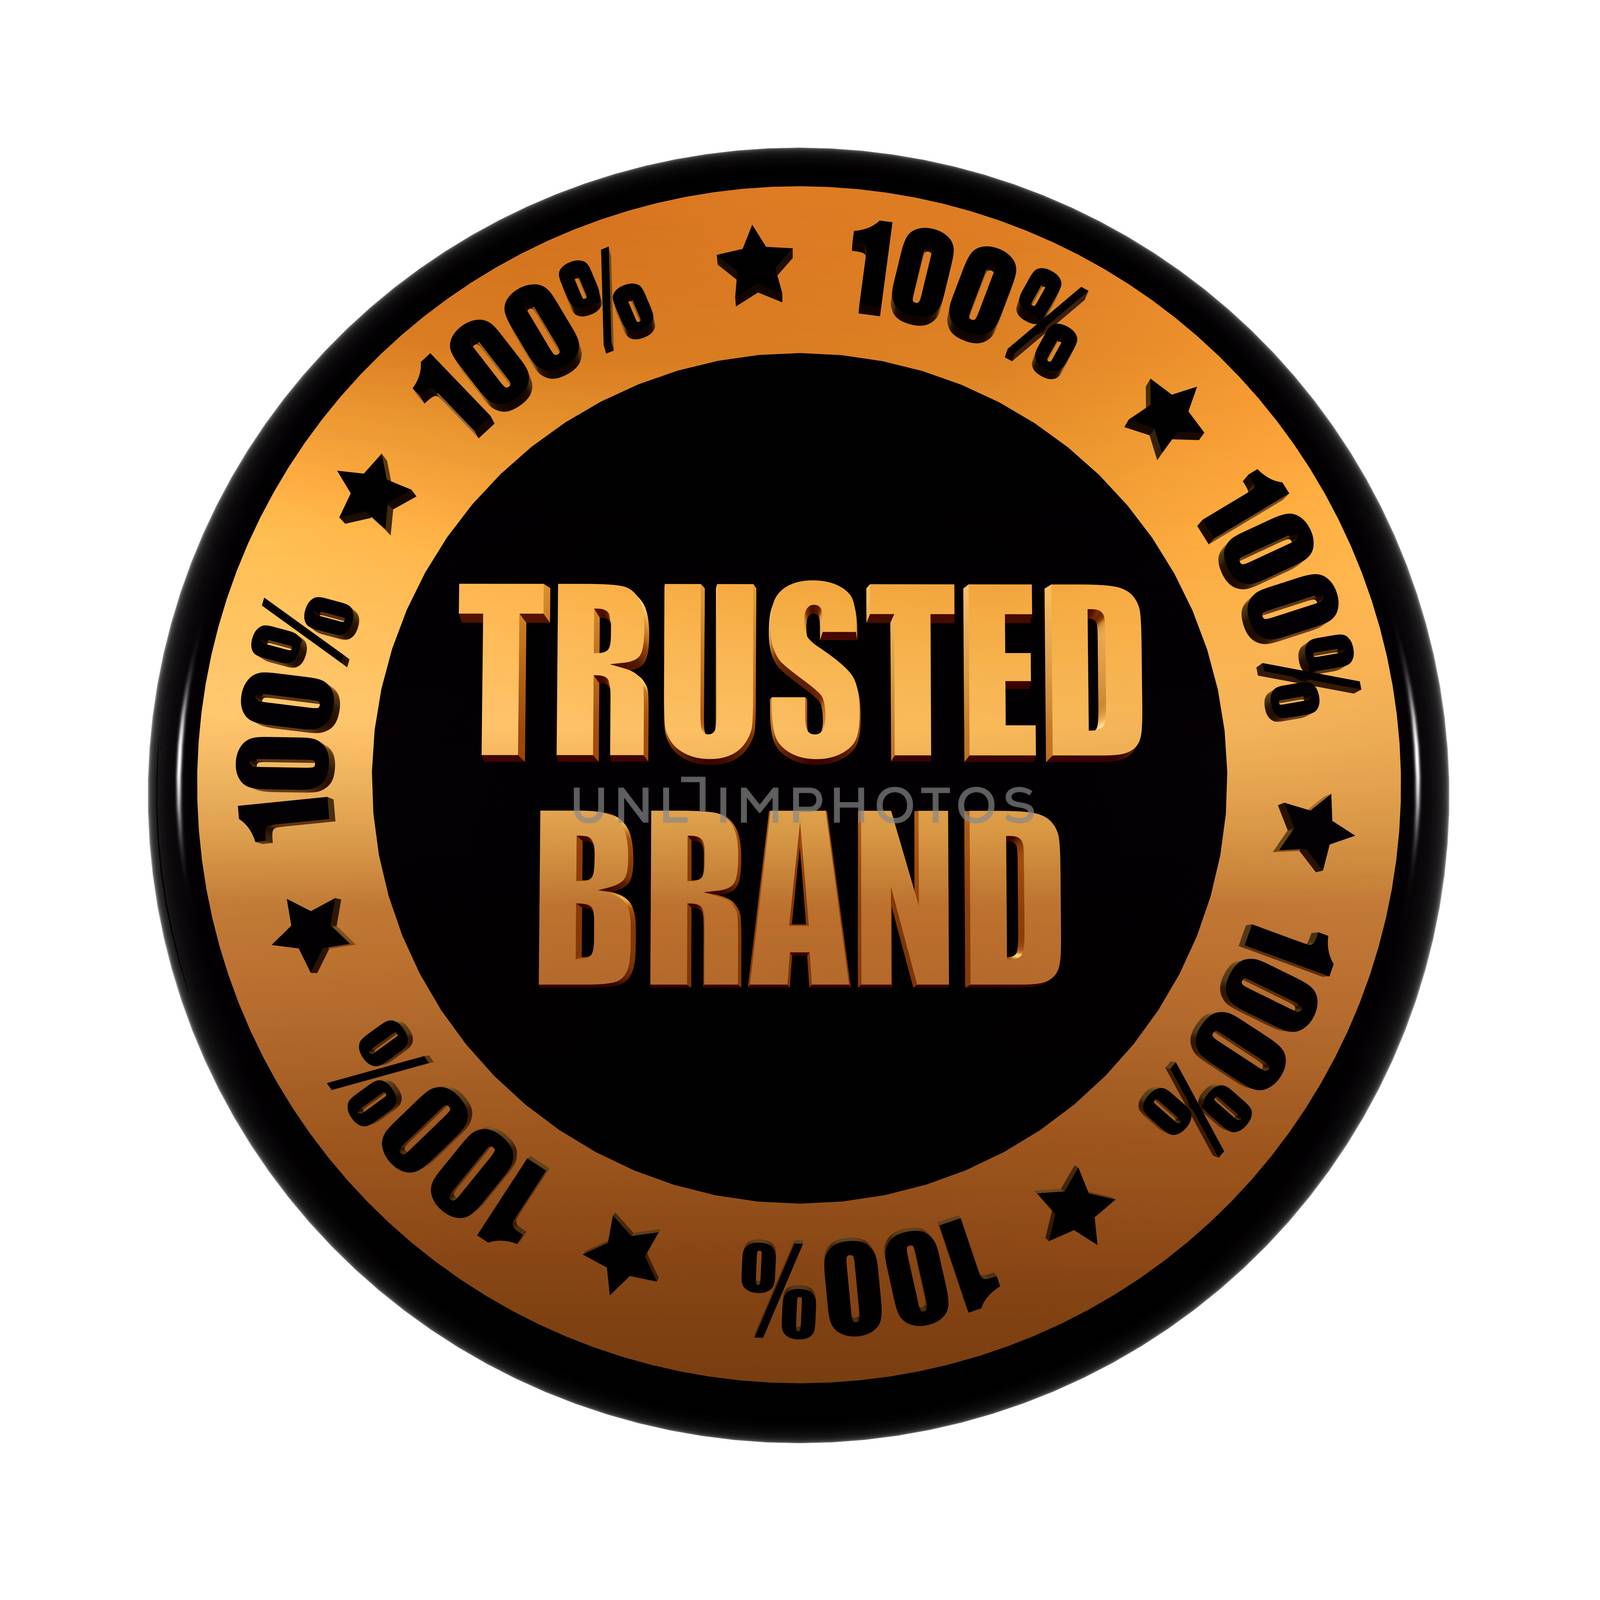 trusted brand 100 percentages - text in 3d golden black circle label with stars, business concept